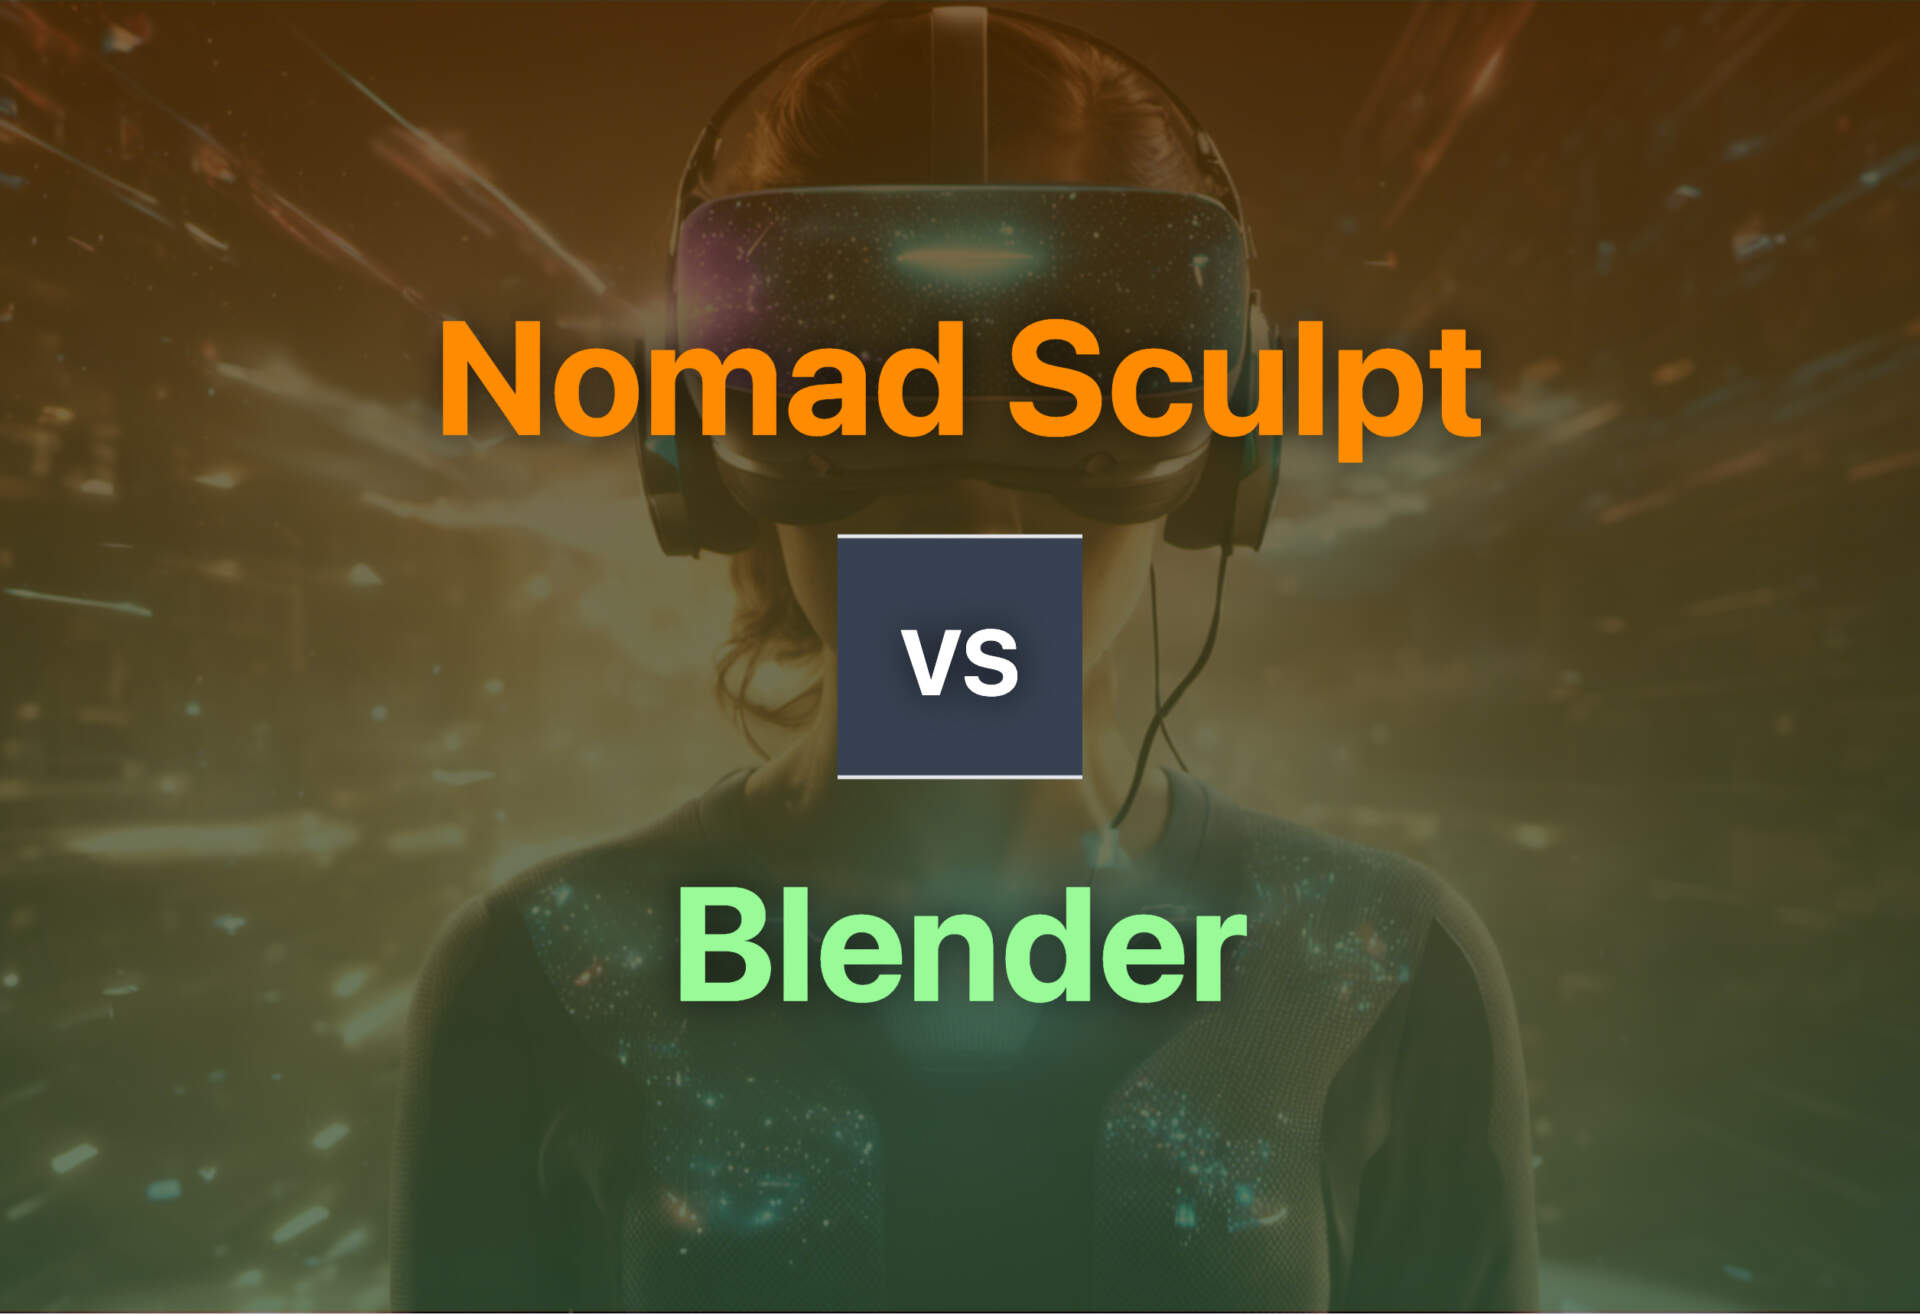 Differences of Nomad Sculpt and Blender